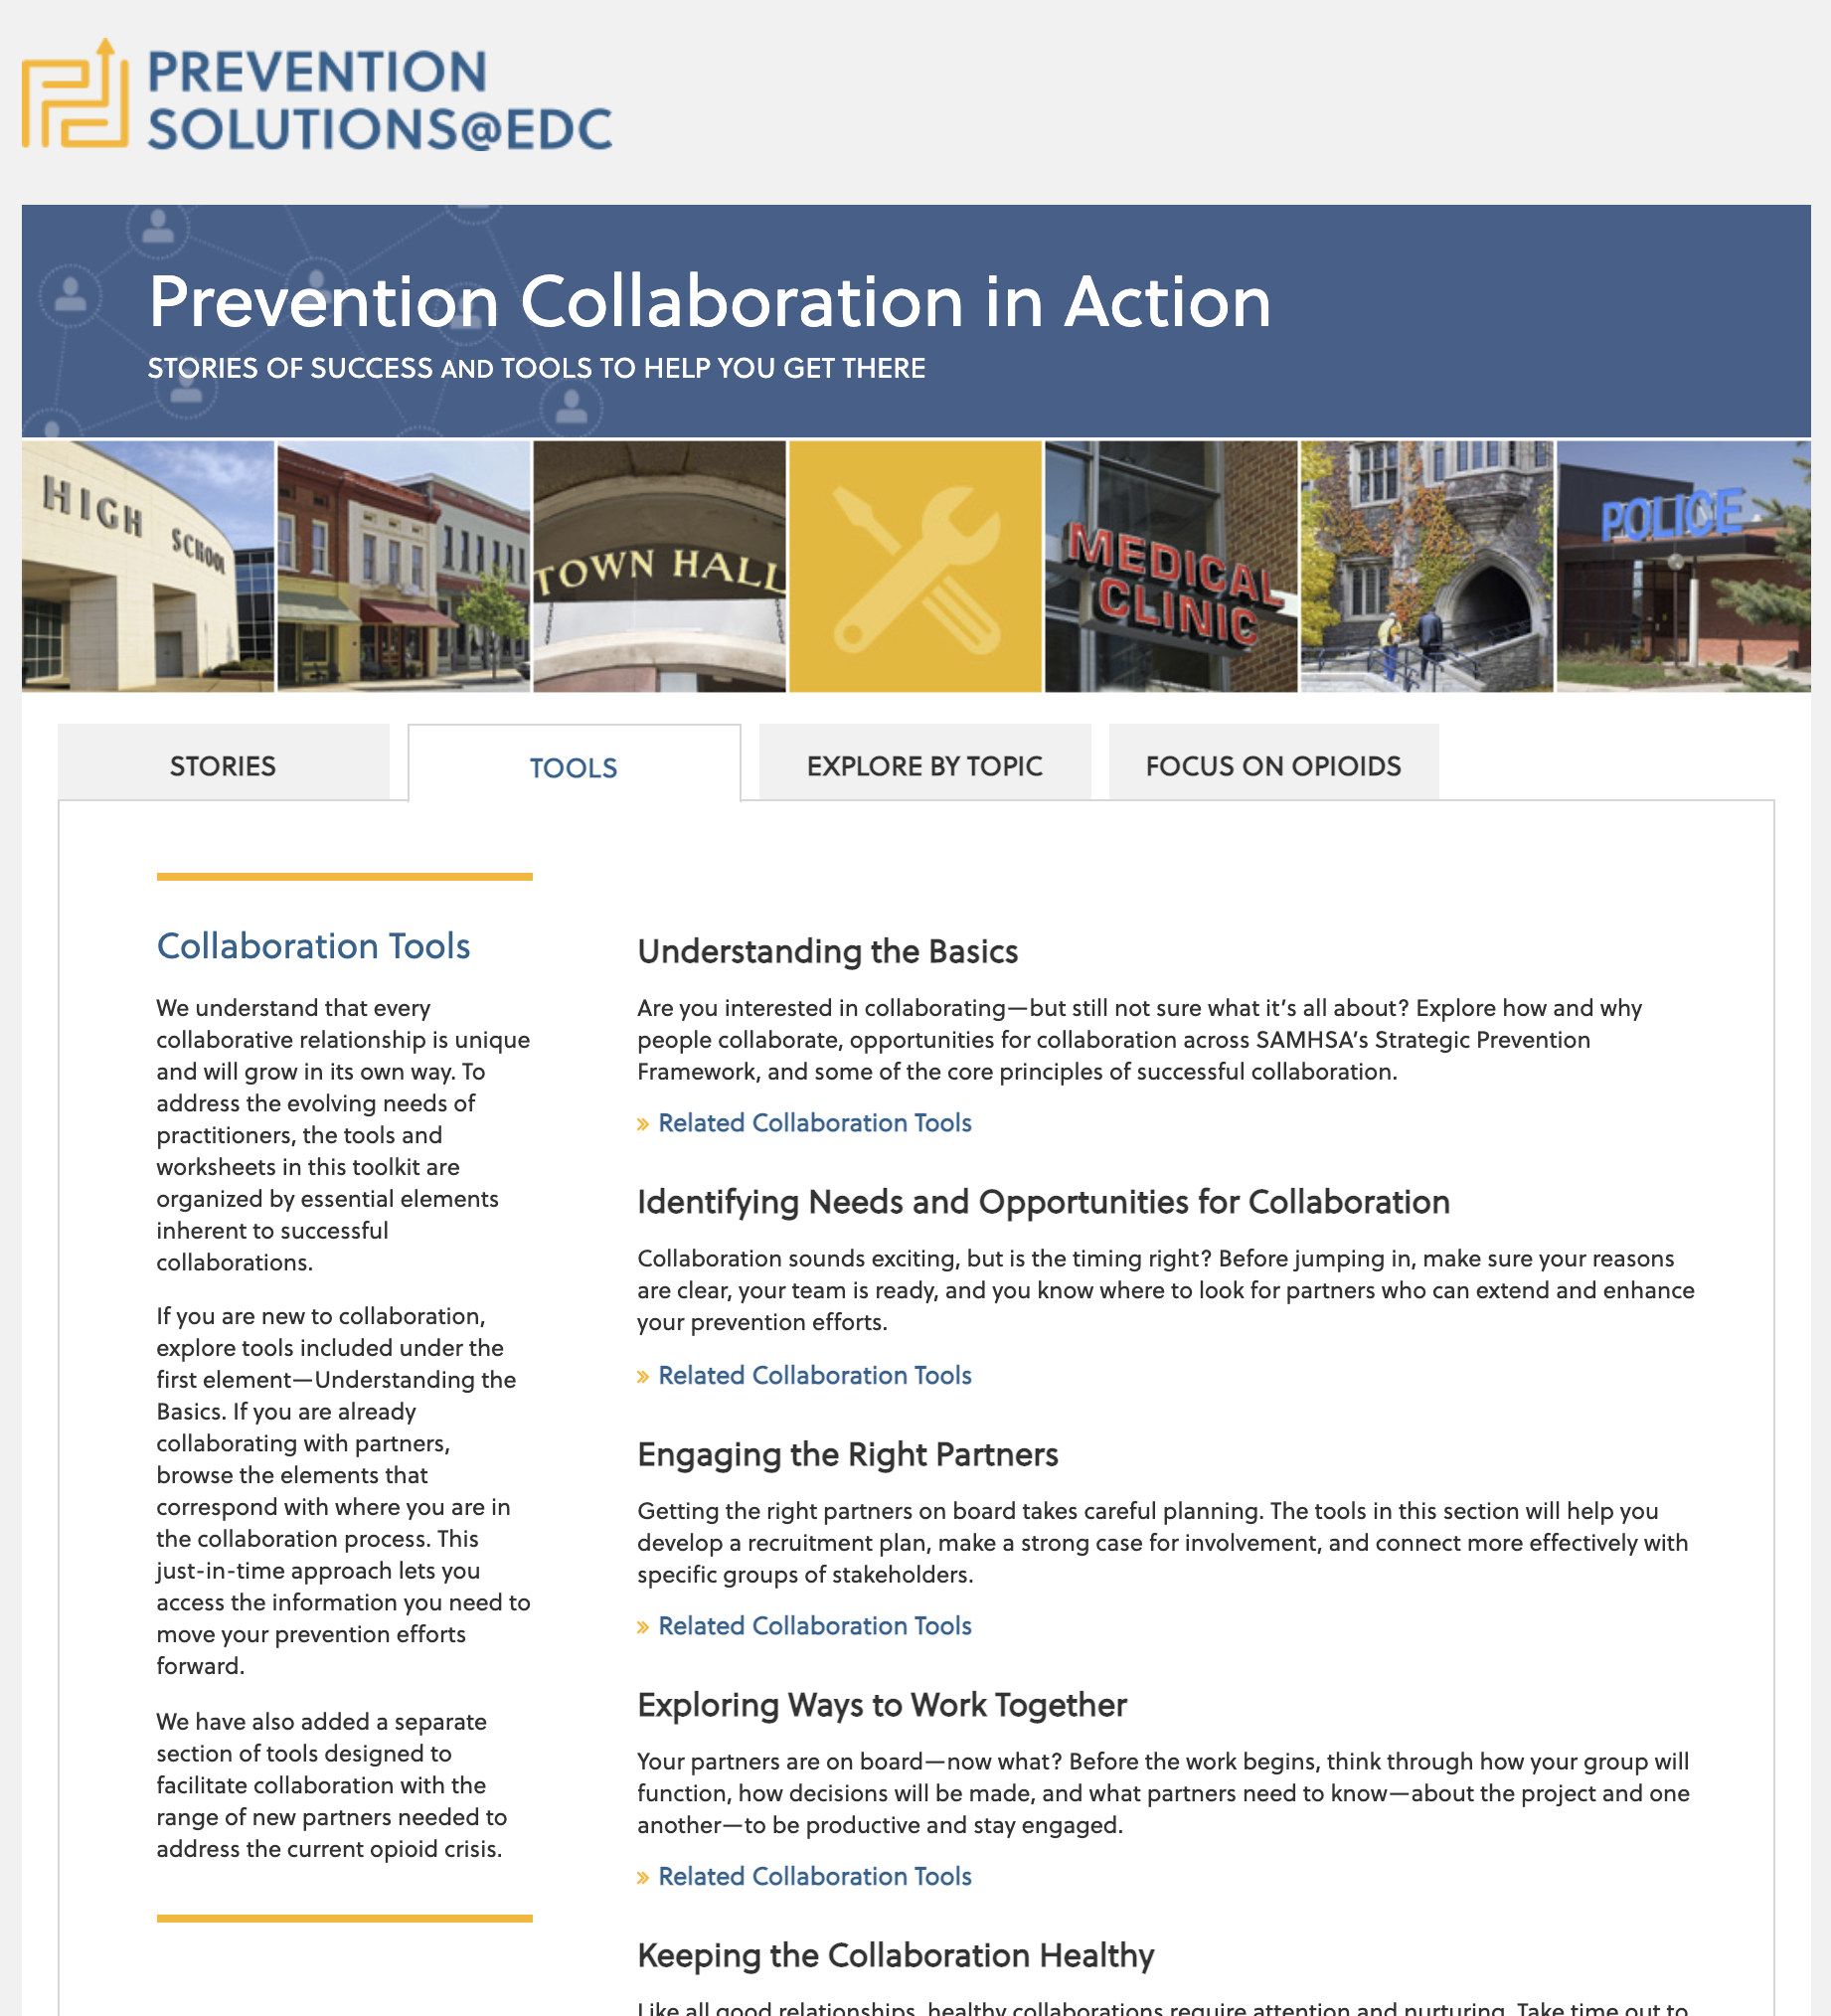 Prevention Collaboration in Action: Stories of Success and Tools to Help You Get There